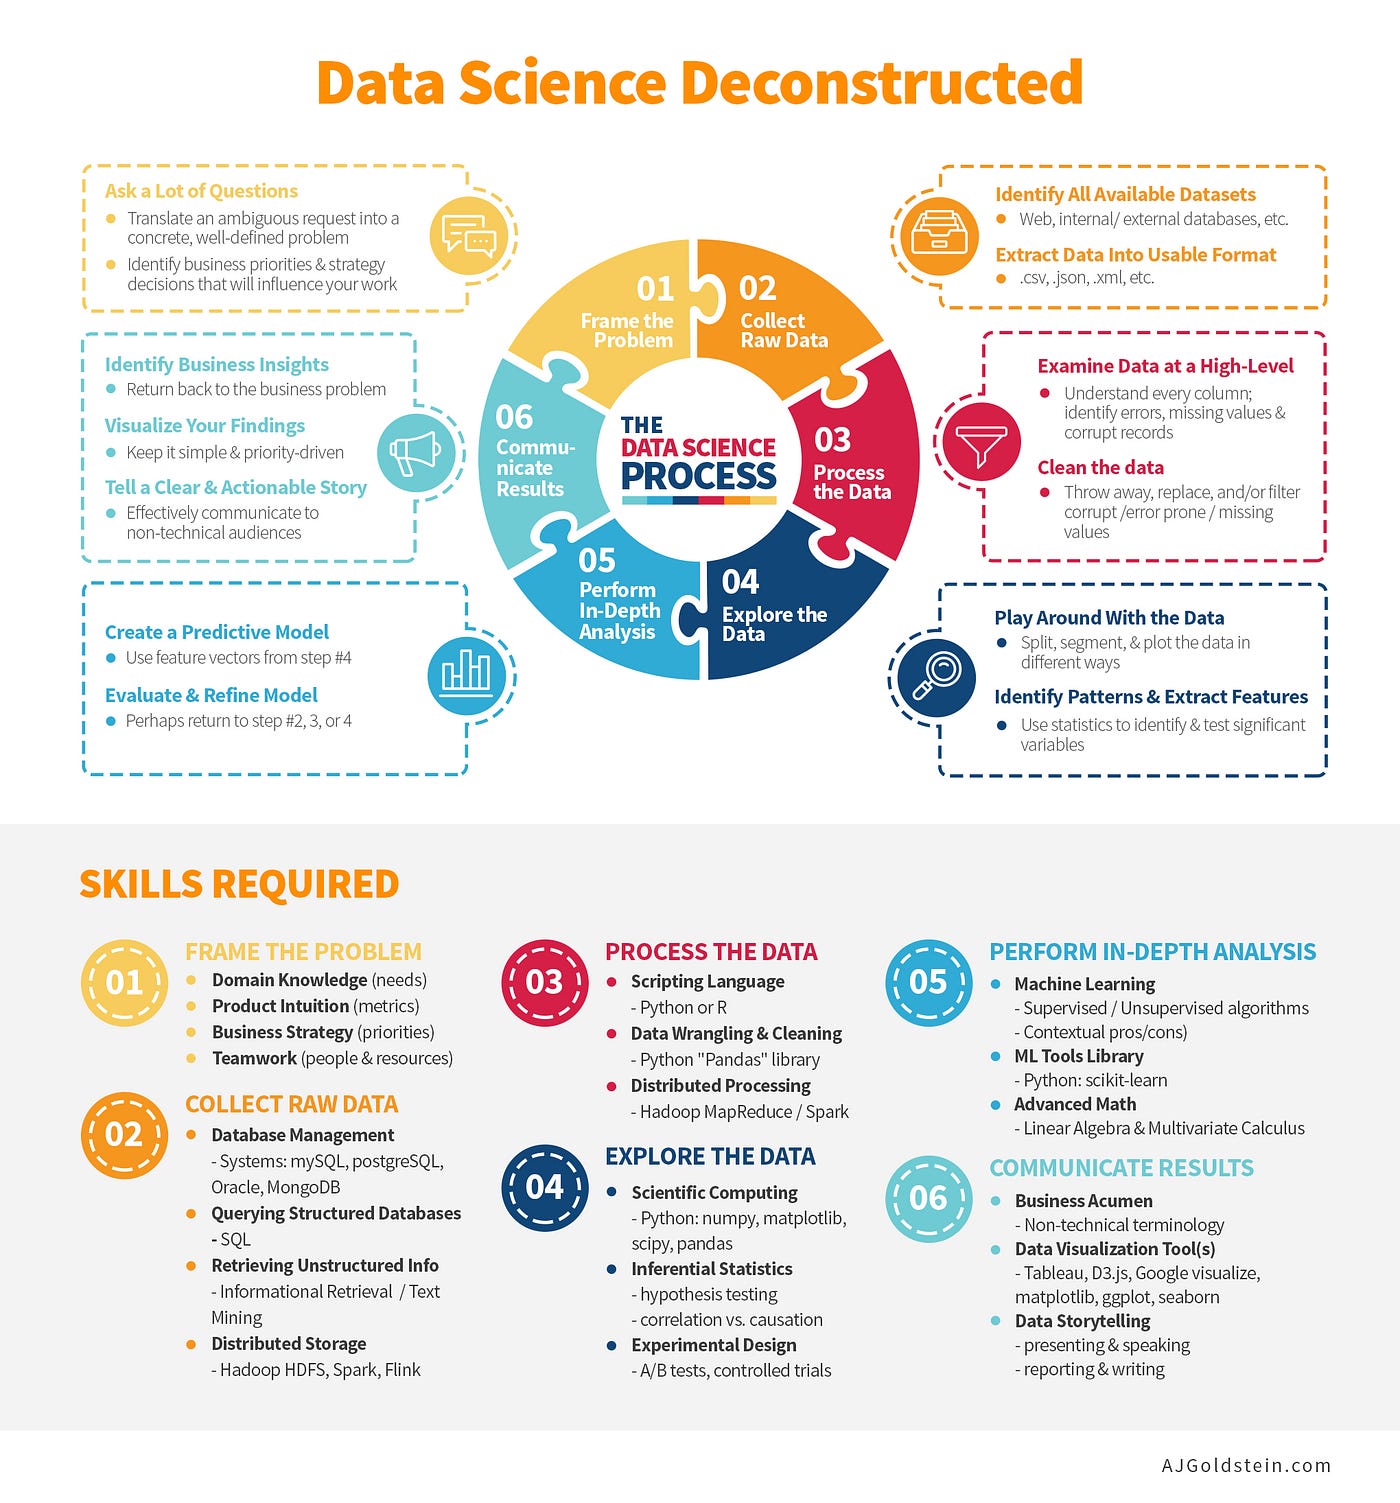 Deconstructing Data Science: Breaking The Complex Craft Into It's